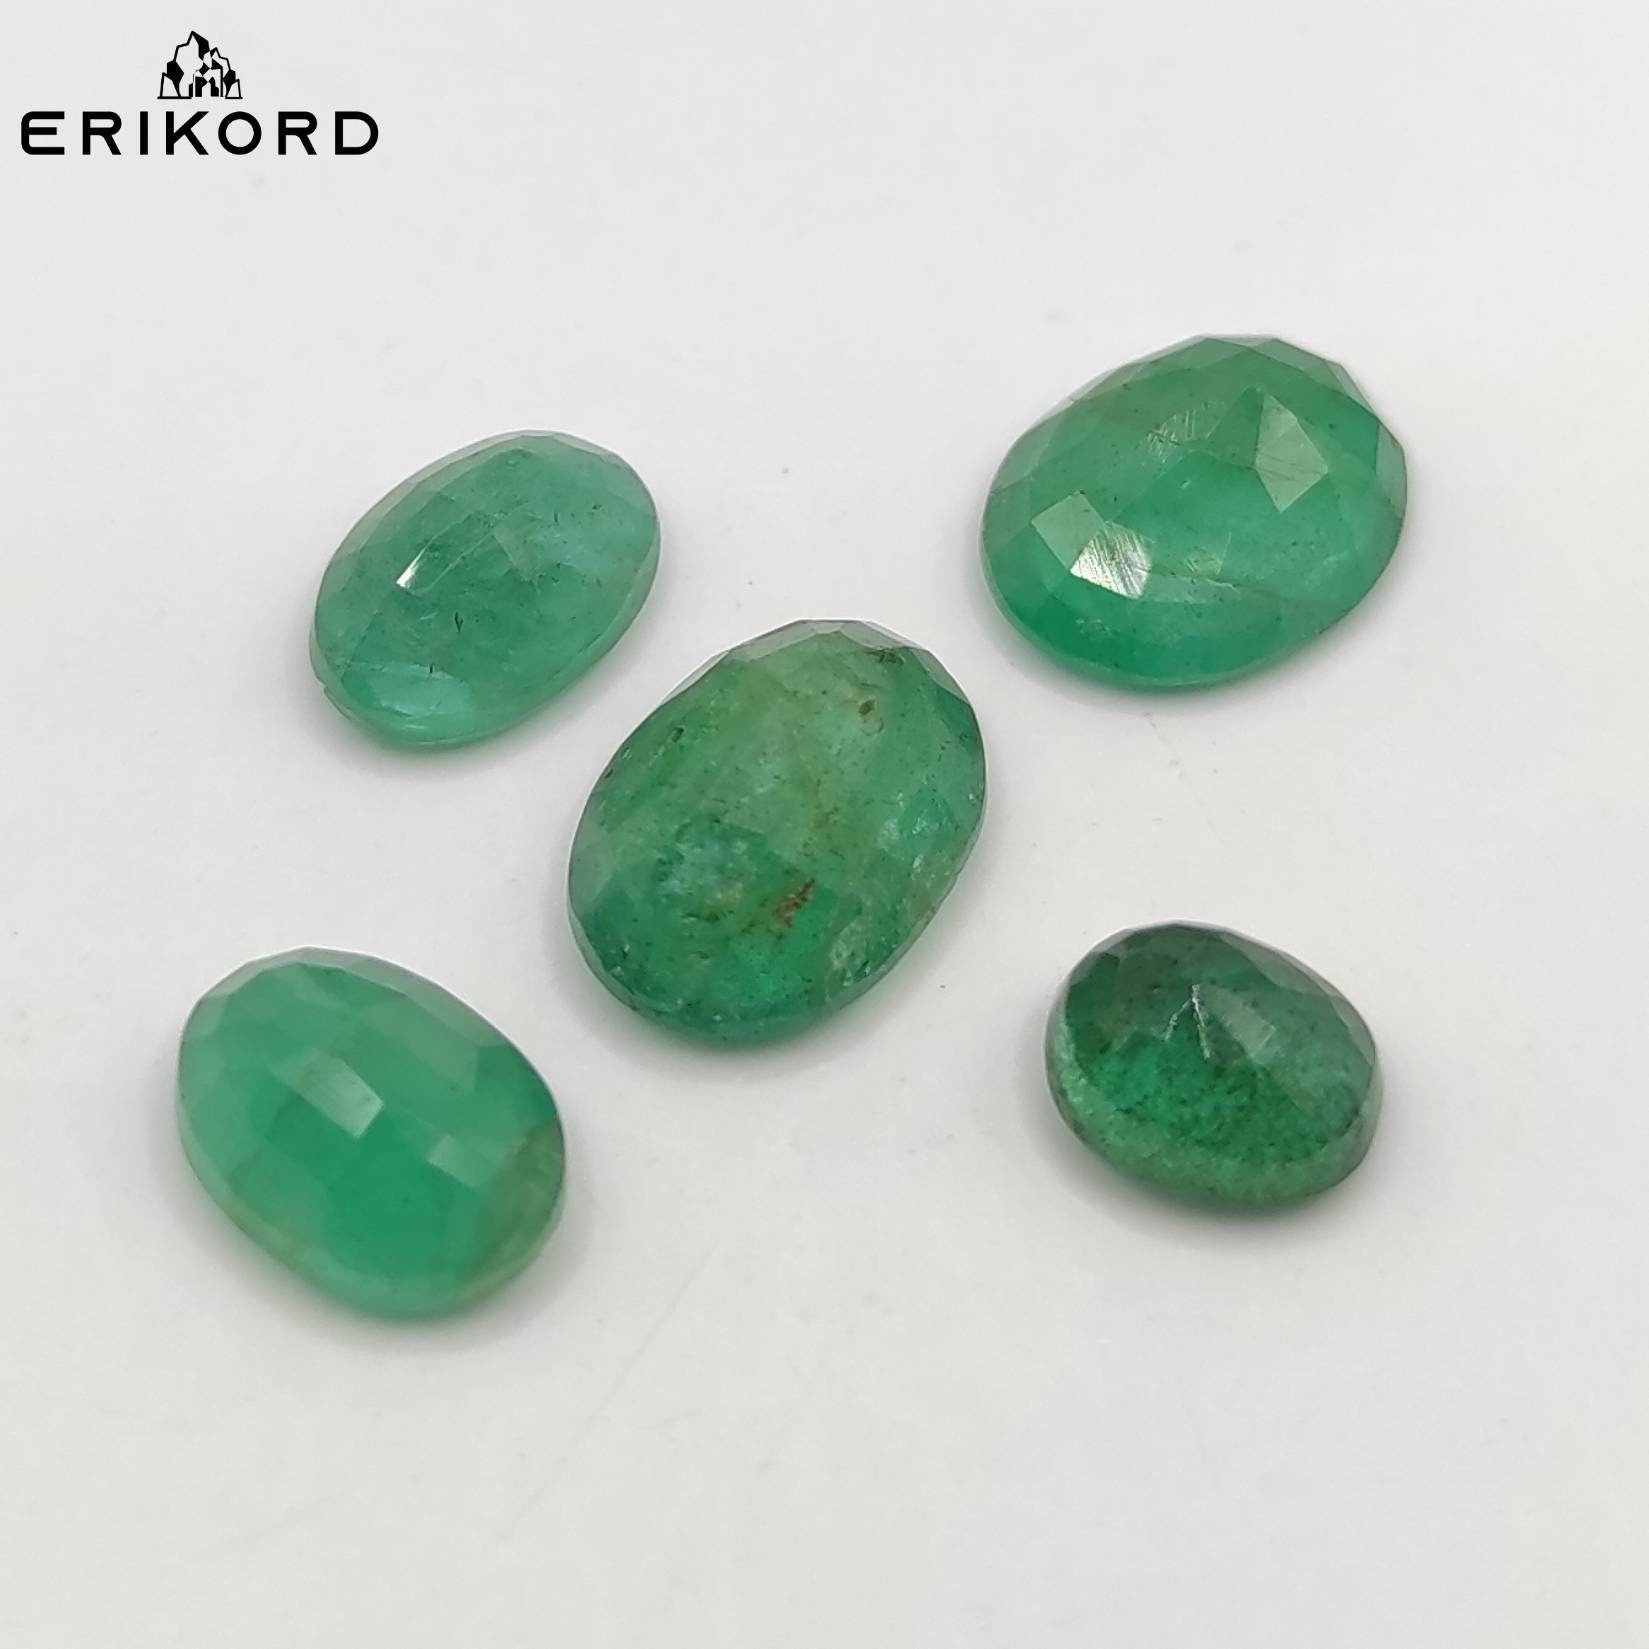 5.45ct Lot of Emerald Green Emerald Zambian Emeralds Loose Gems Untreated Emerald Faceted Oval Cut Gemstone Ring Earrings Cut Gems Polished